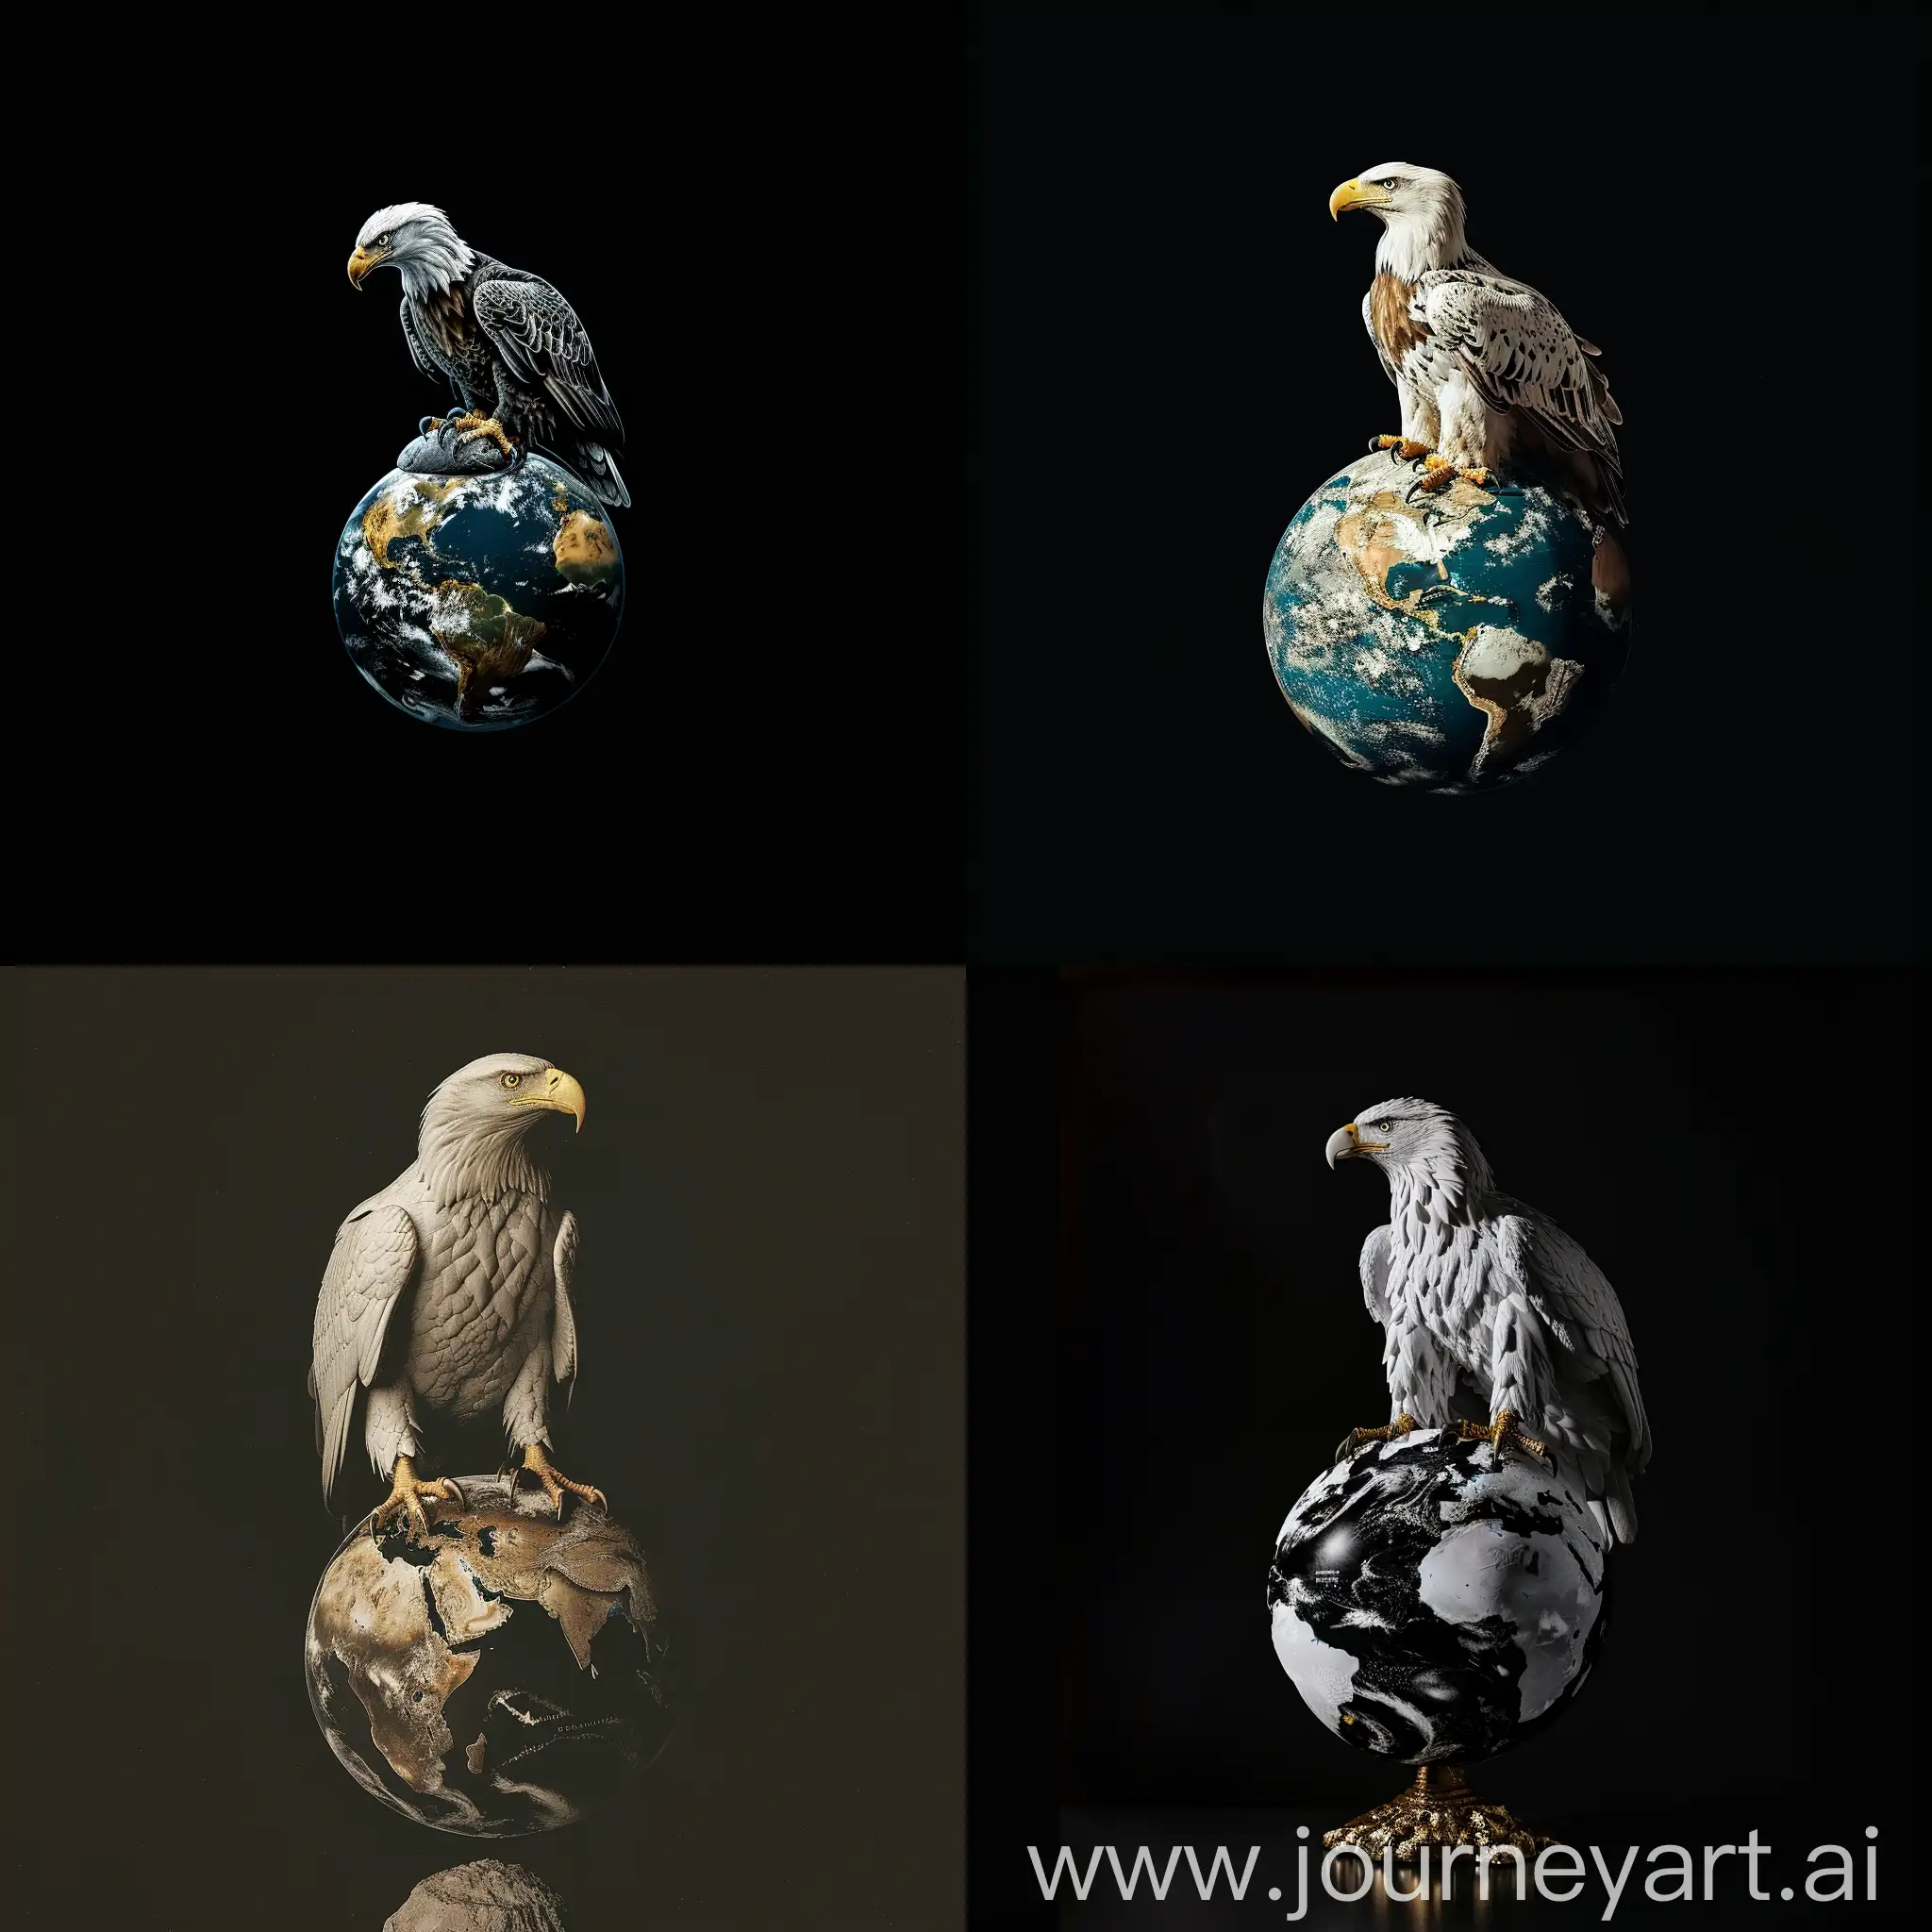 Strict minimalism, black background, in the center a white golden eagle sitting on the globe, holding it in its claws